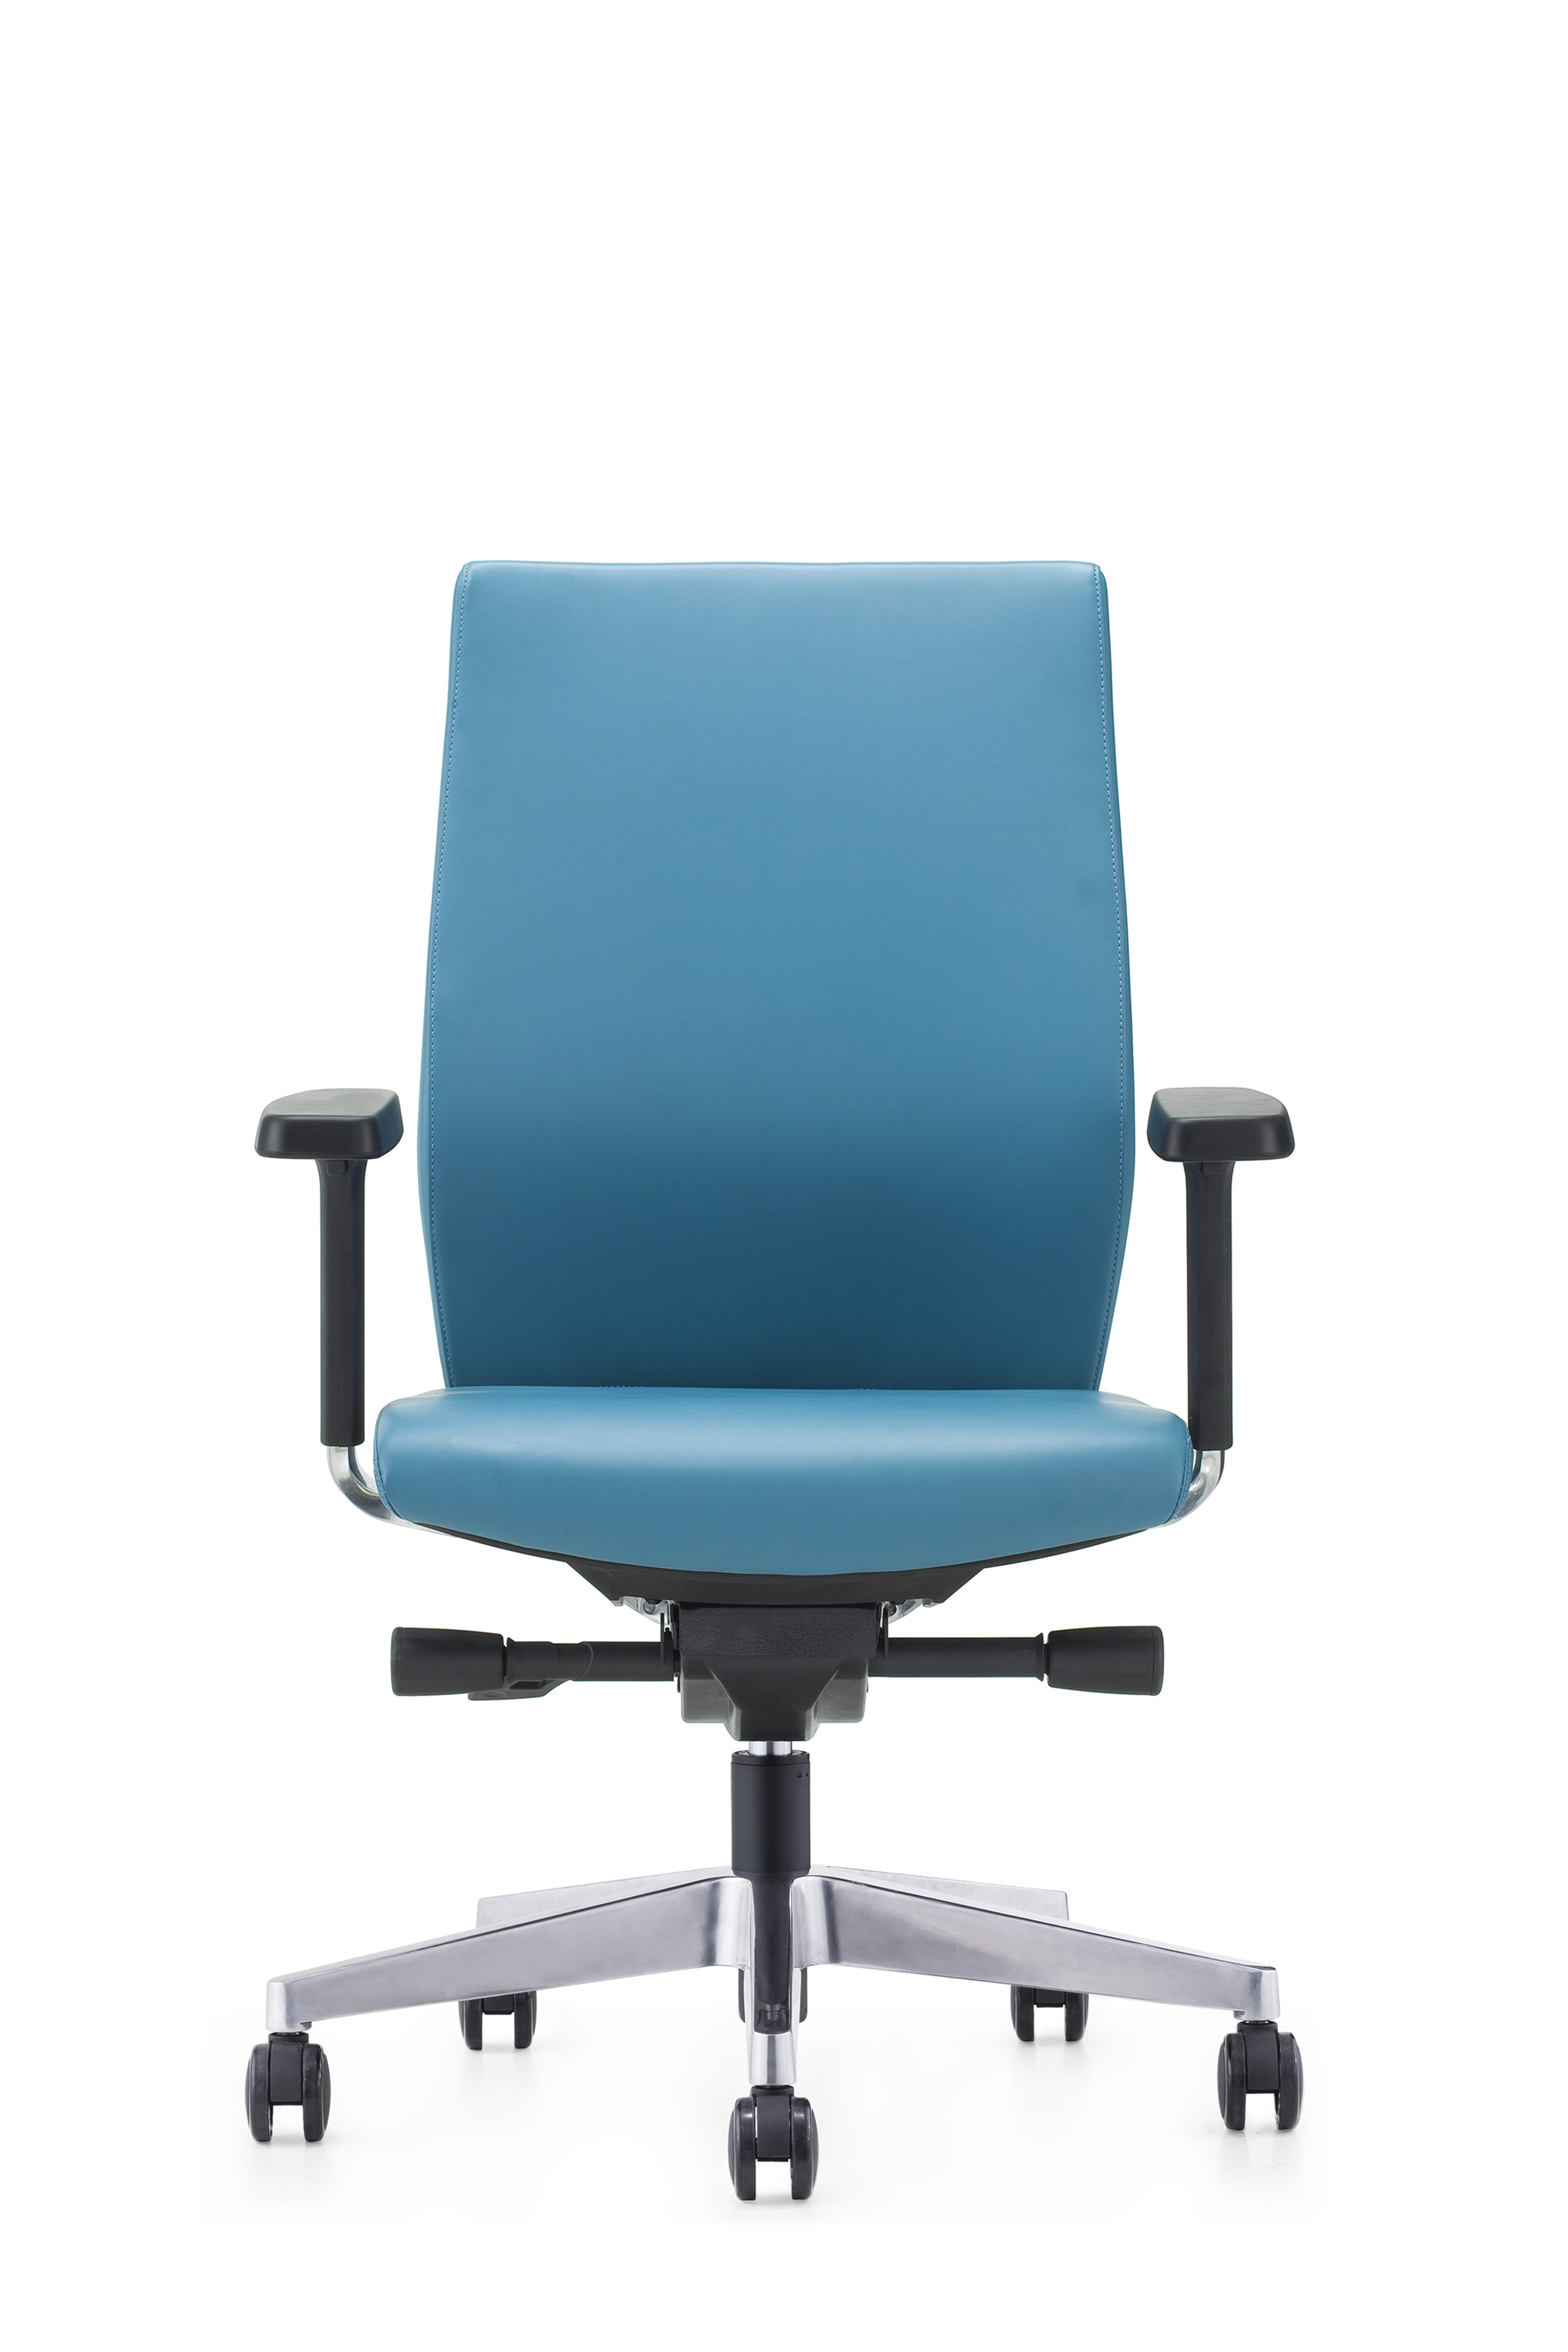 China Wholesale Leather Folding Chair Supplier –  CH-240B – SitZone